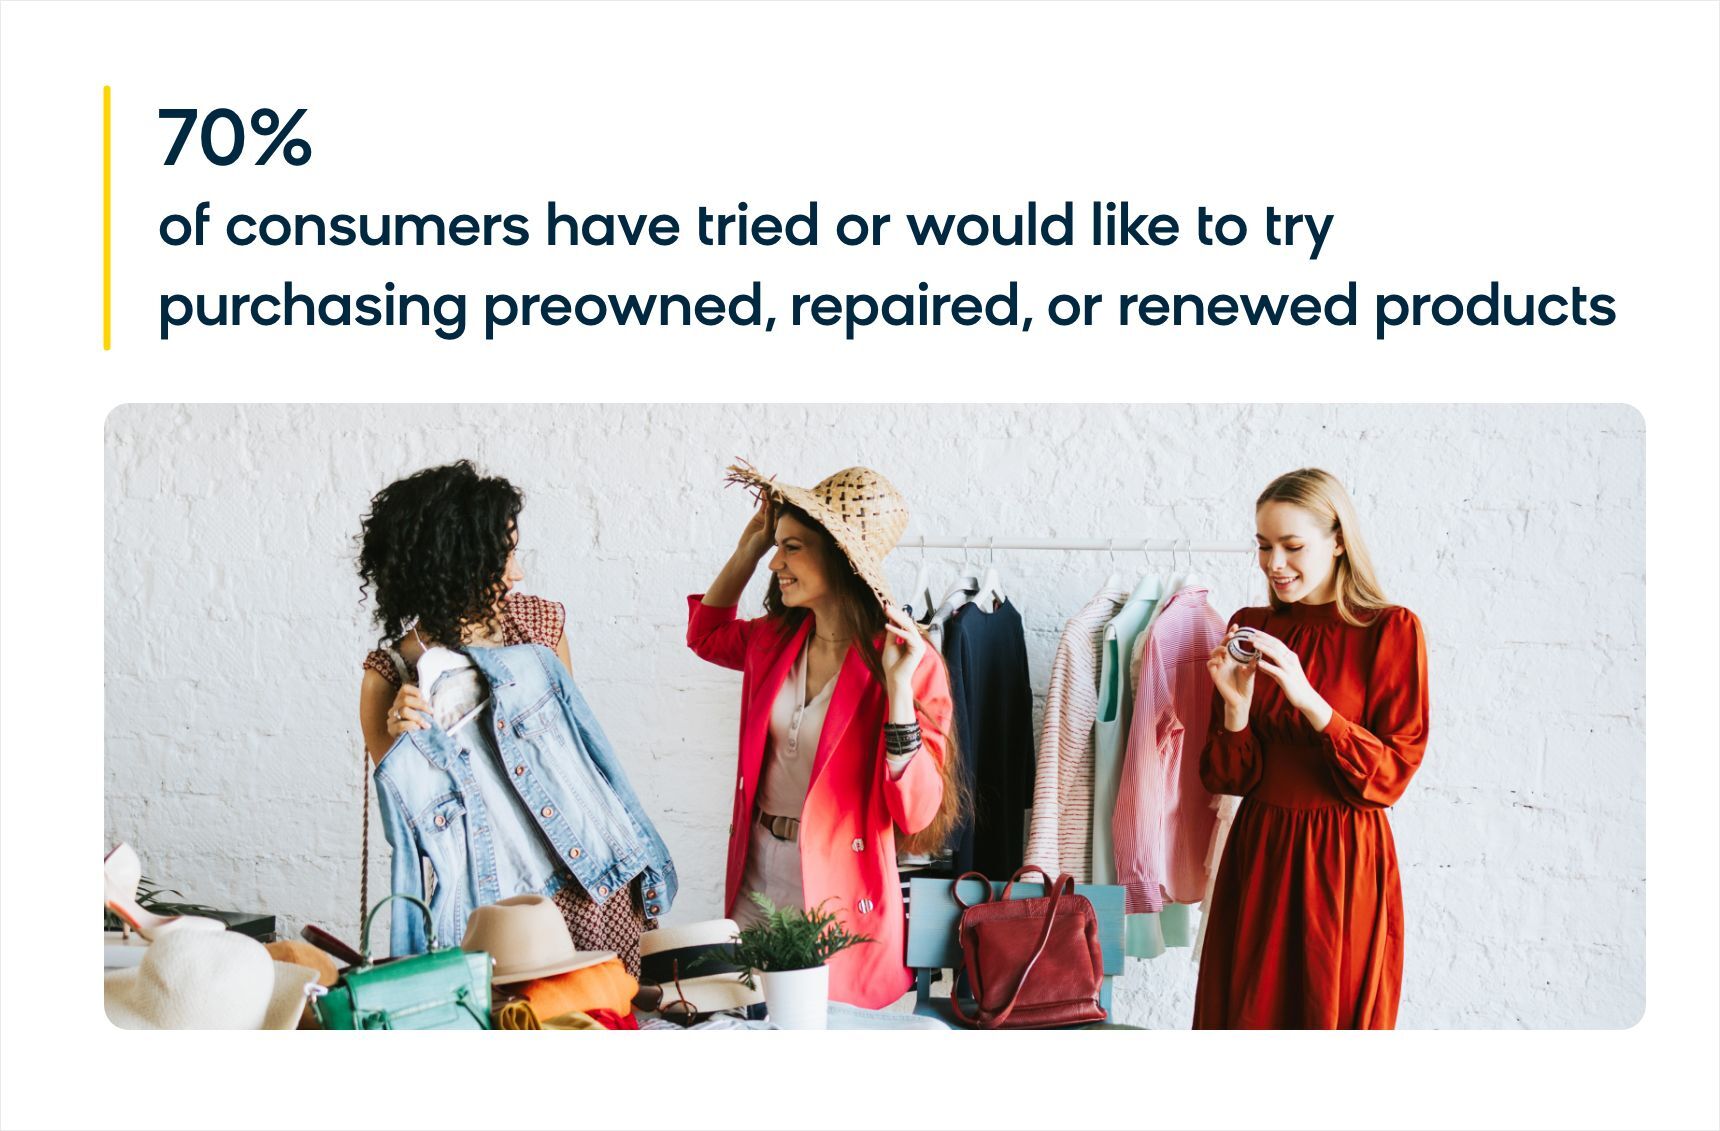 70% of consumers have tried or would like to try purchasing preowned, repaired, or renewed products